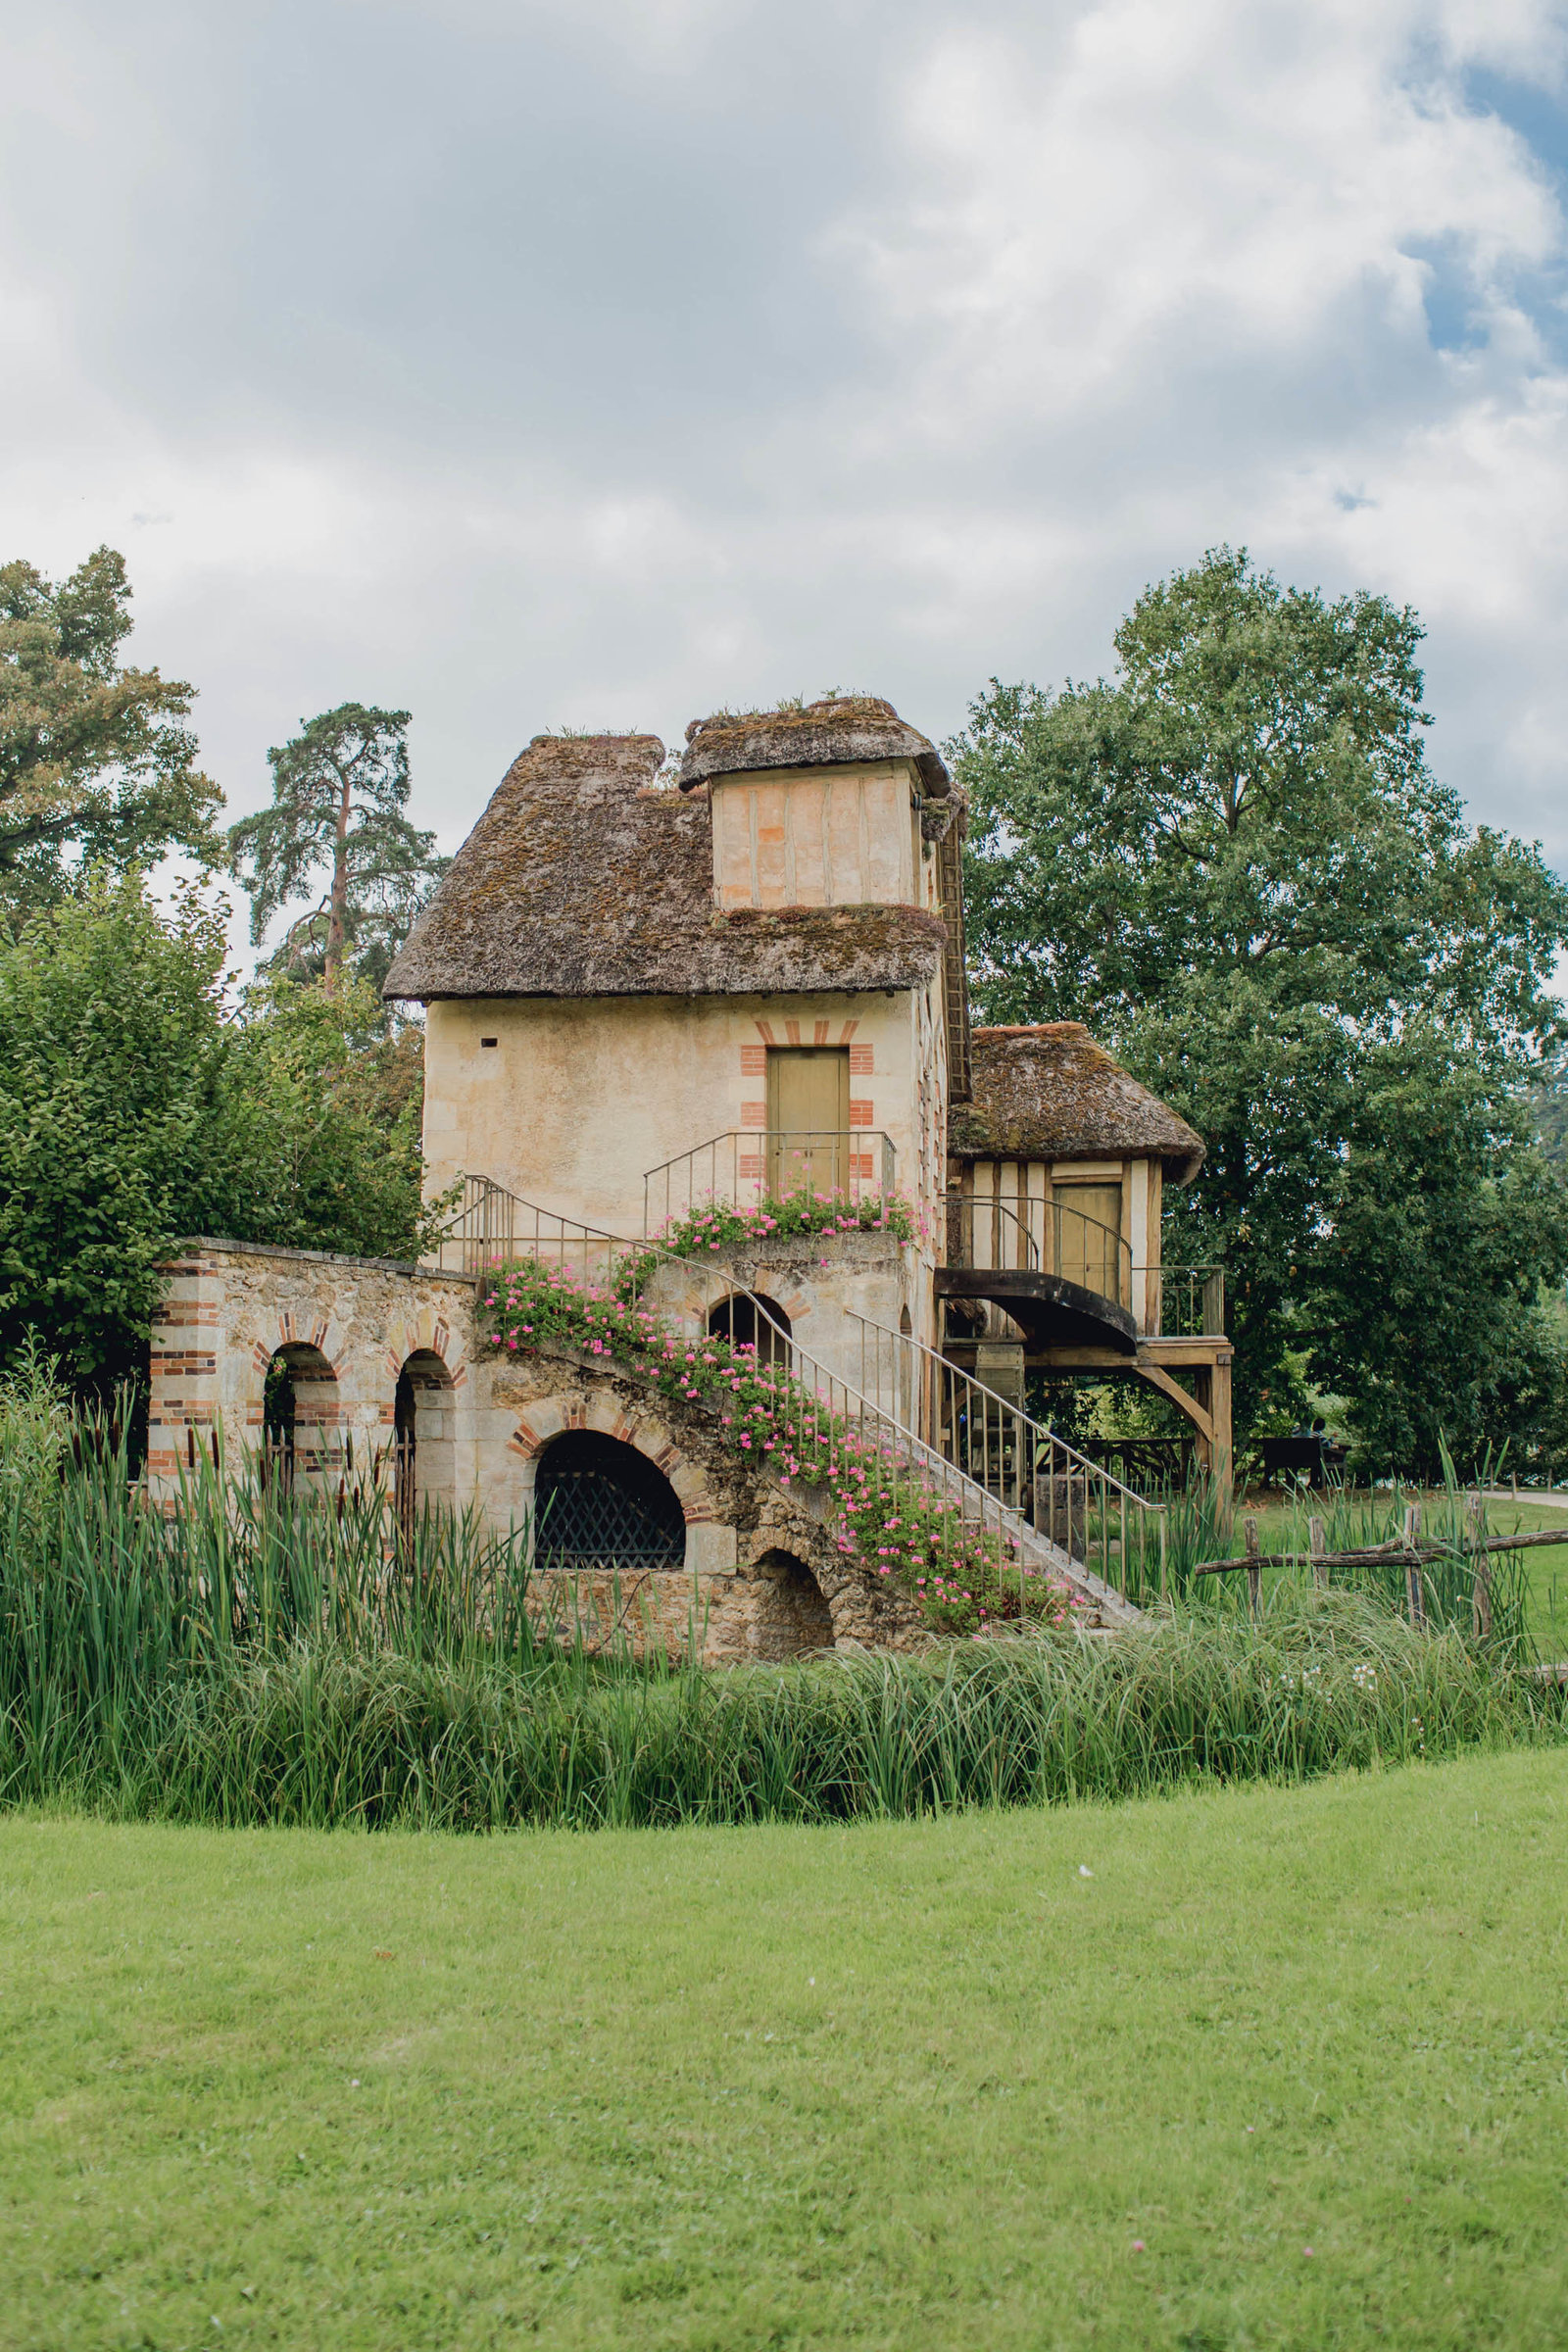 mill-marie-antoinette-hamlet-versailles-france-travel-destination-kate-timbers-photography-1715